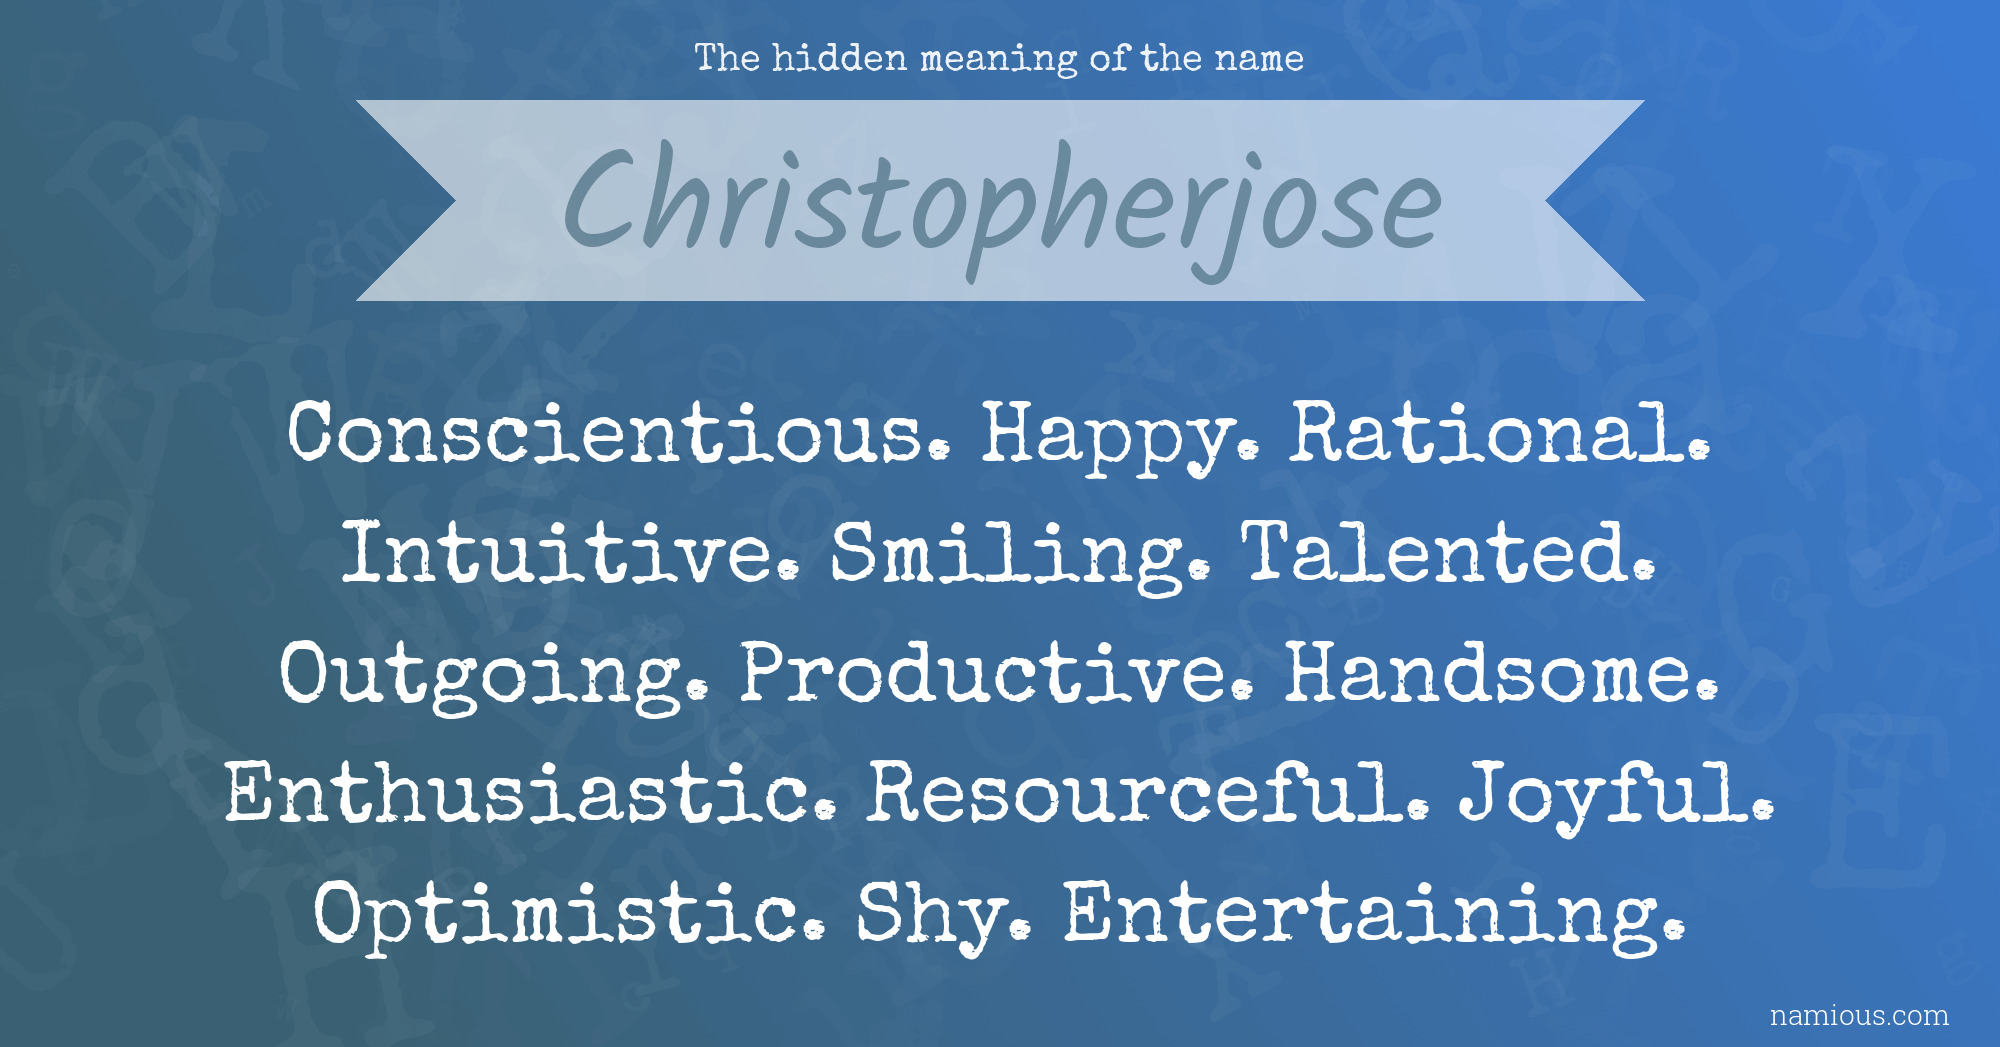 The hidden meaning of the name Christopherjose